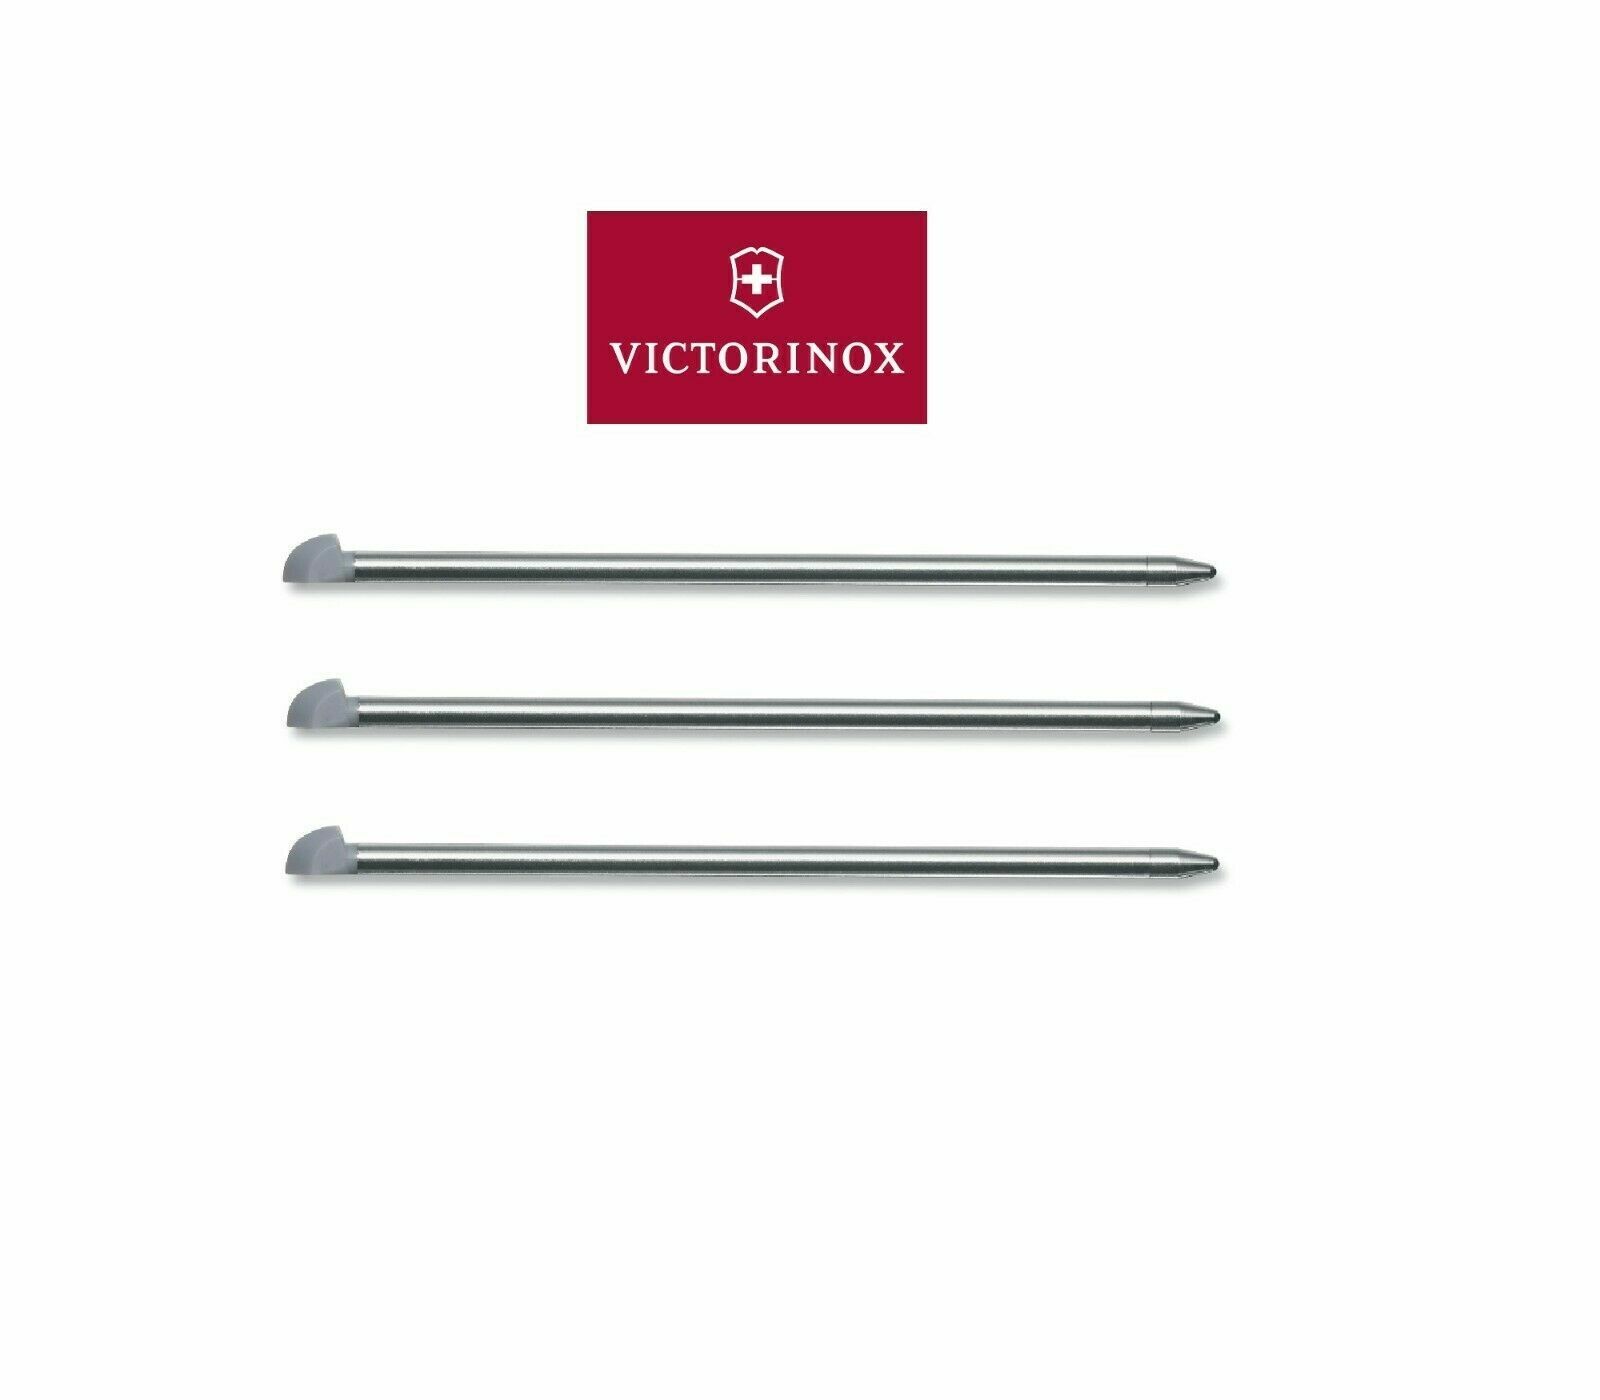 LOT OF 3 VICTORINOX LARGE REPLACEMENT PEN FOR 91 MM KNIVES BLUE INK A.3644  Victorinox # A.3644.100